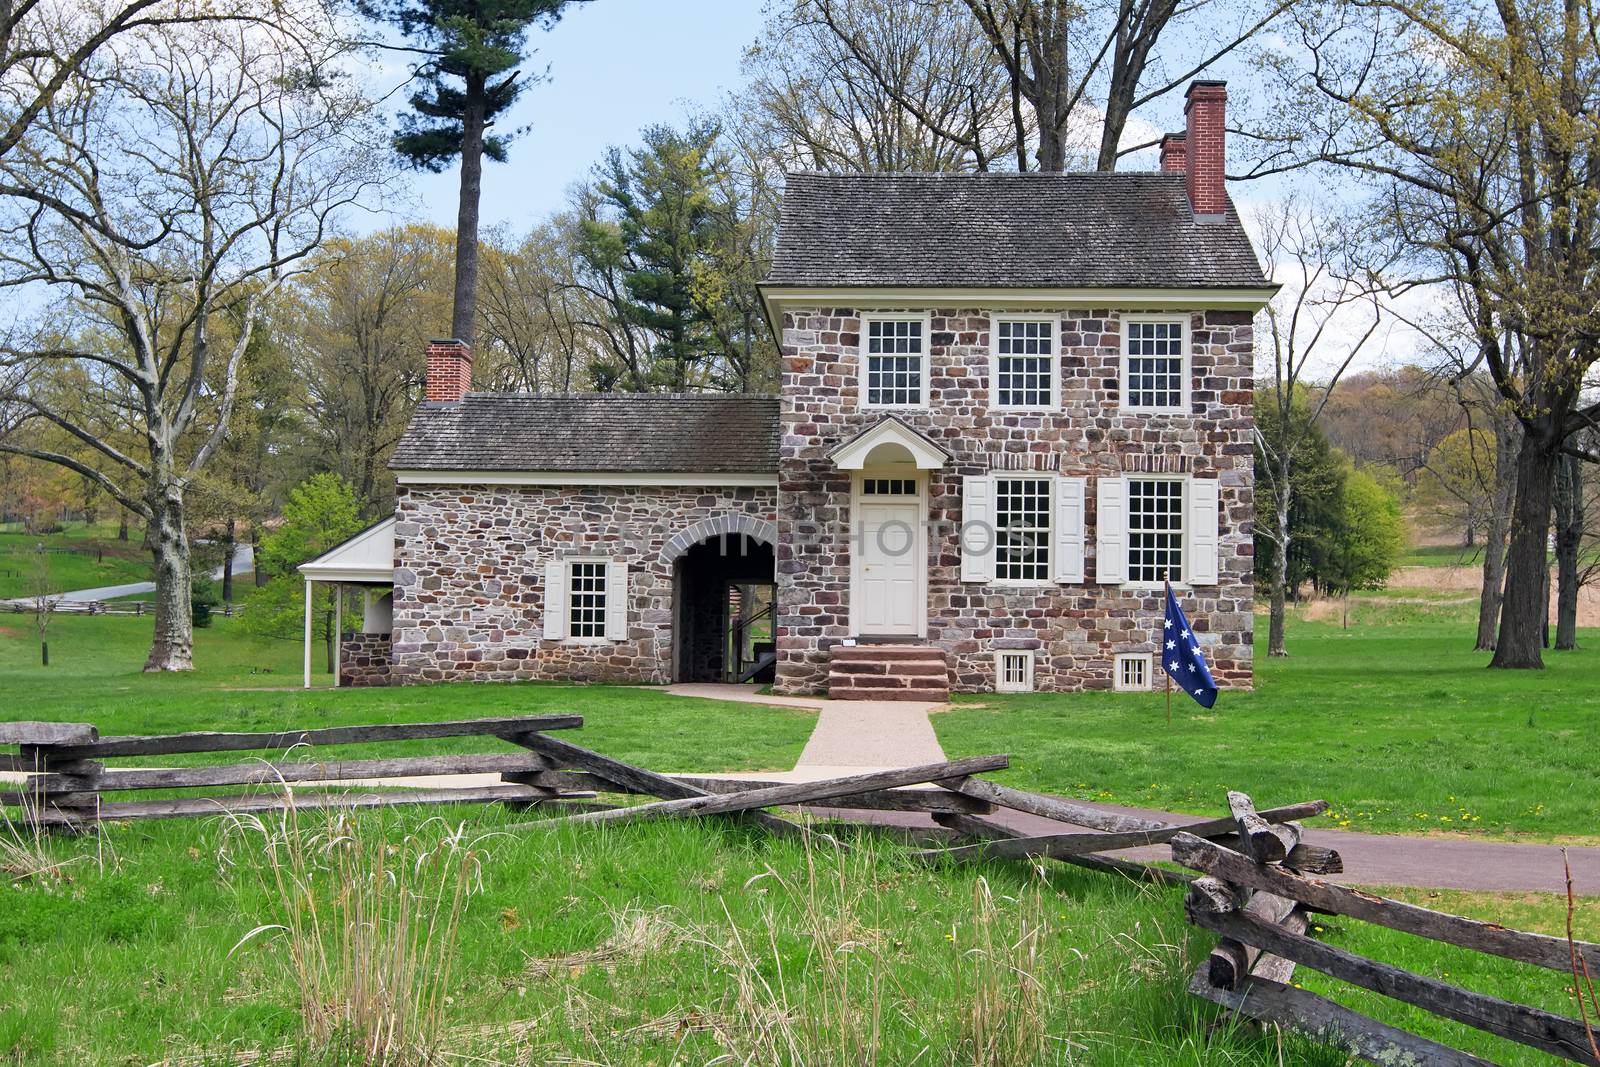 This house at the Valley Forge National Historical Park was George Washington's winter headquarters.Here the General coordinated the daily operations of the of the entire Continental Army.